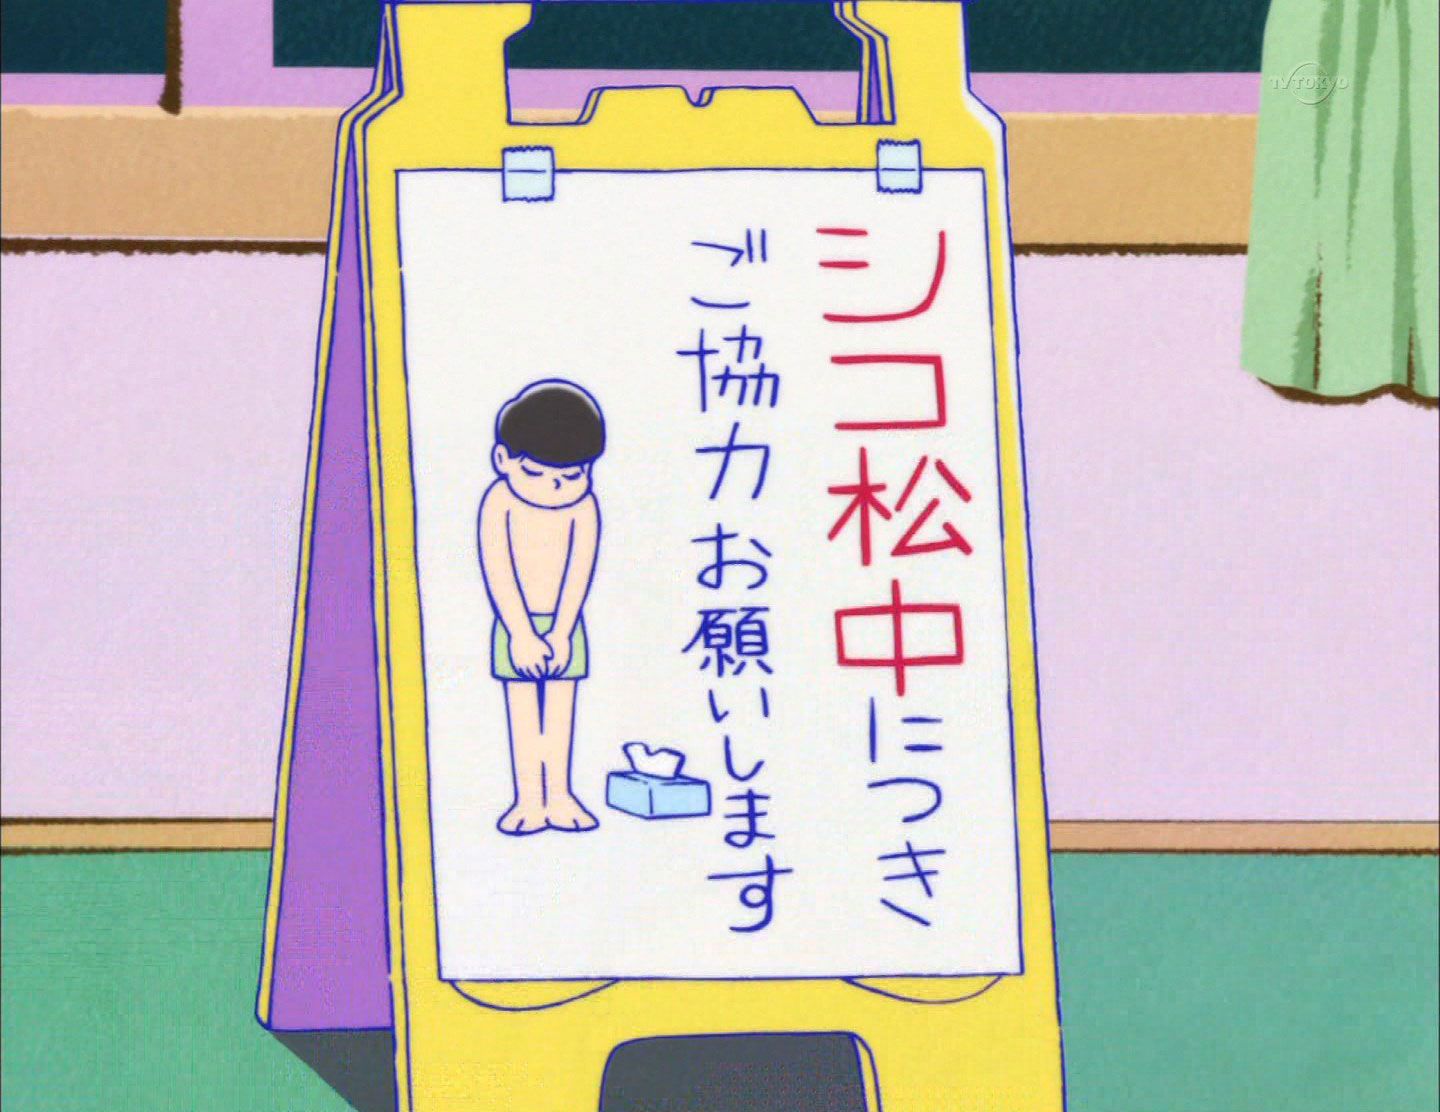 [Mexico pine! ] "Perhaps song" 13 episodes, two rough starts another animation www www favorite was how women's pine? 43